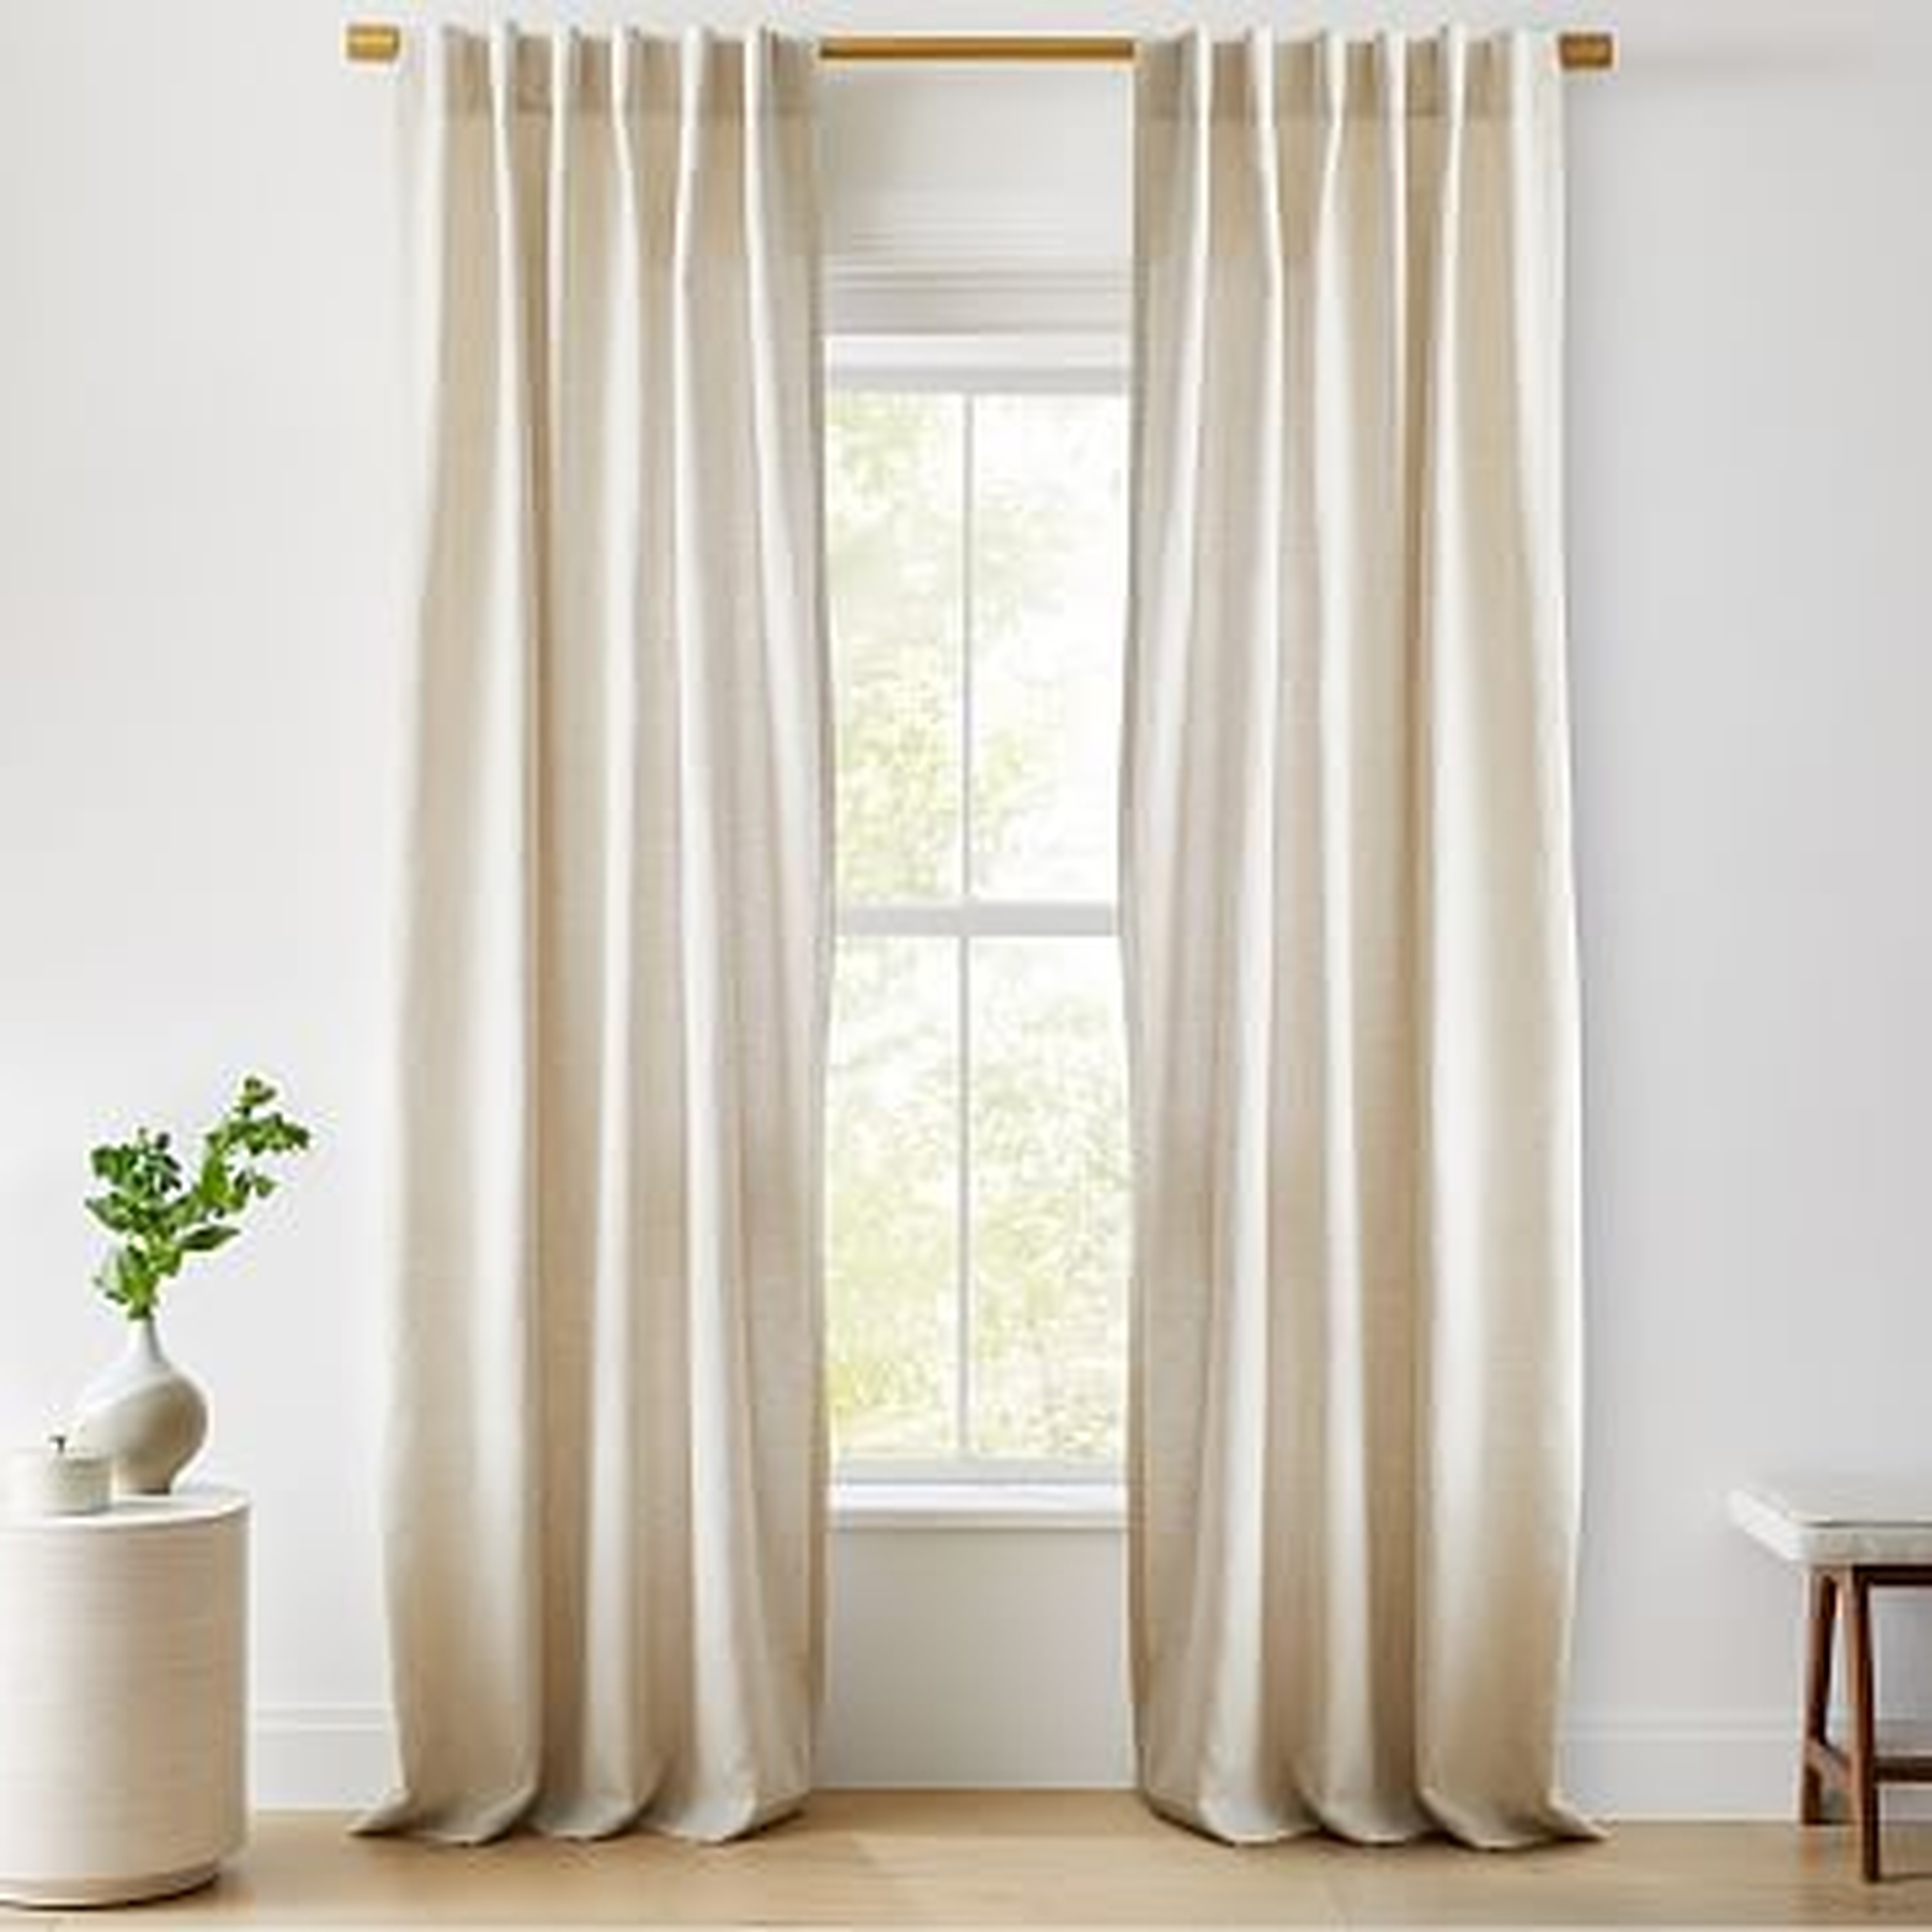 Custom Size Solid European Flax Linen Curtain with Cotton Lining, Natural, 120"x80" - West Elm